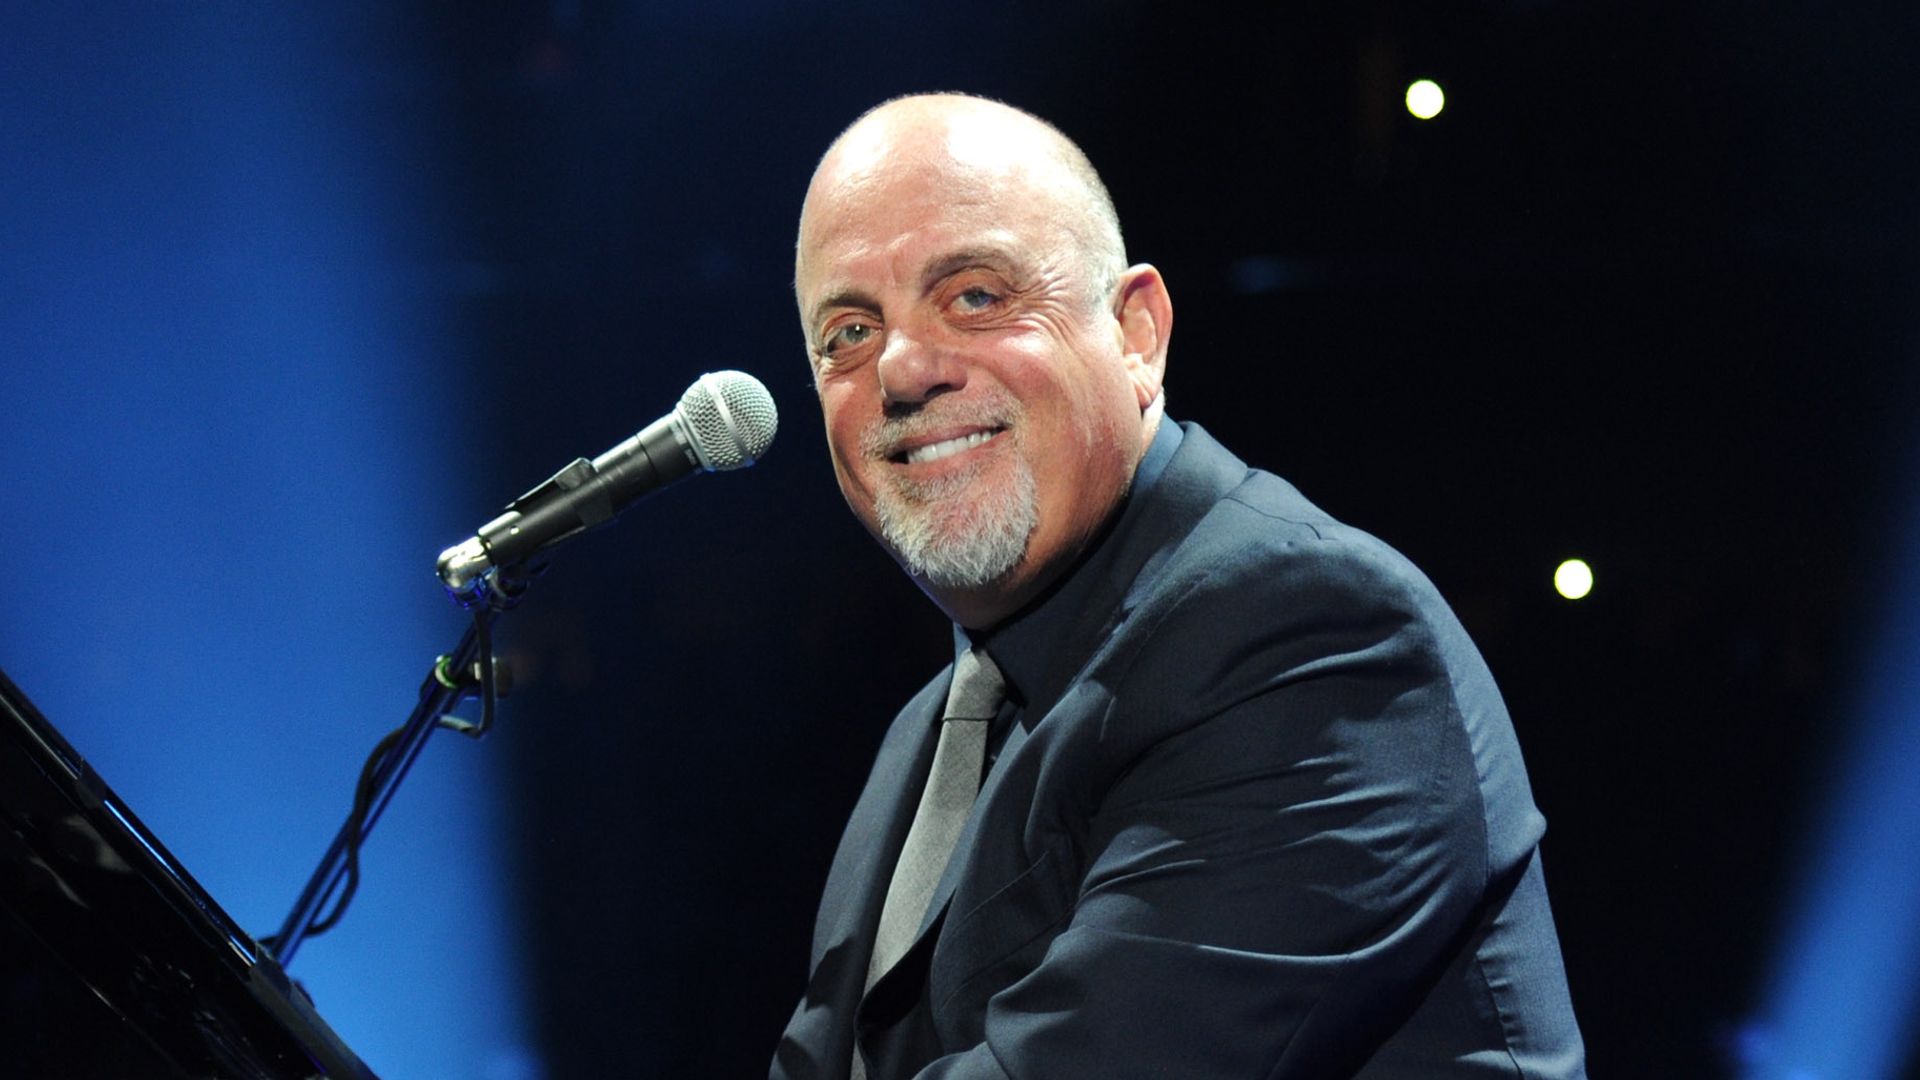 All about Billy Joel's staggering net worth and million-dollar paycheck from 10-year MSG residency